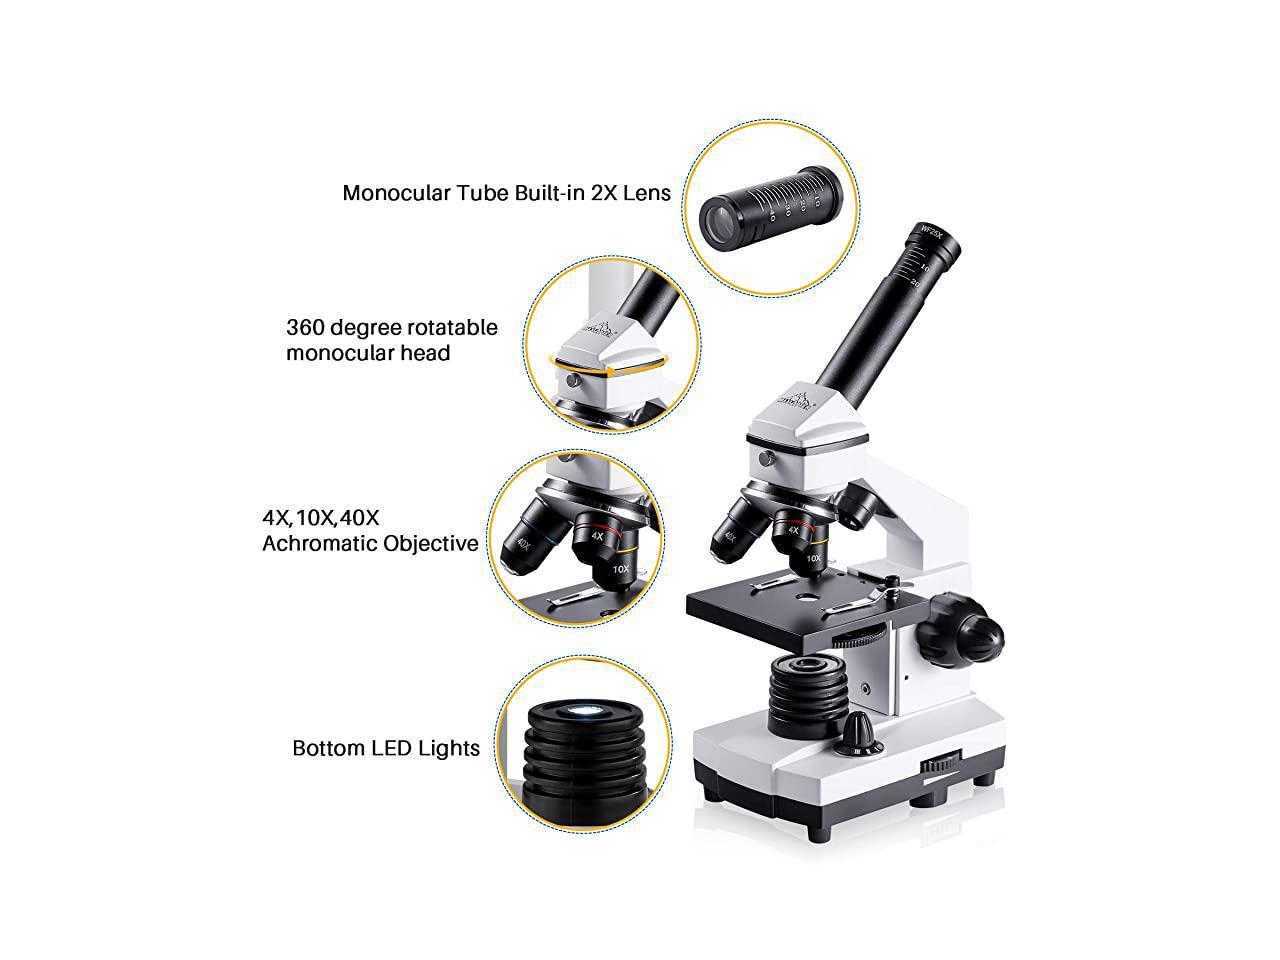 Phone Adapter 40X-1600X Microscopes for Kids Students Adults with Microscope Slides Set Powerful Biological Microscopes for School Laboratory Home Science Education 